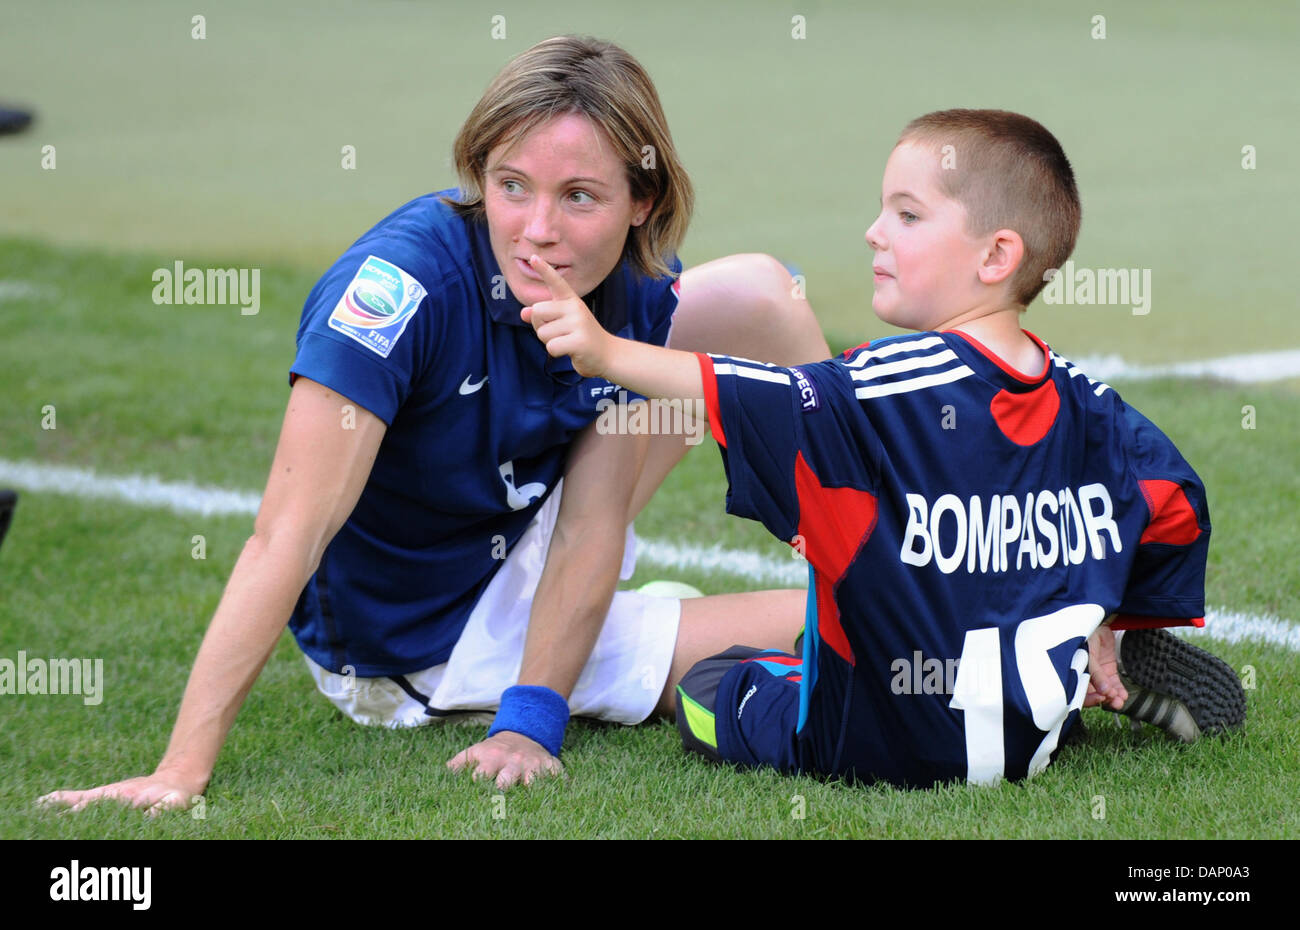 Sonia Bompastor Of France And Her Son Sit On The Pitch After The Fifa Stock Photo Alamy